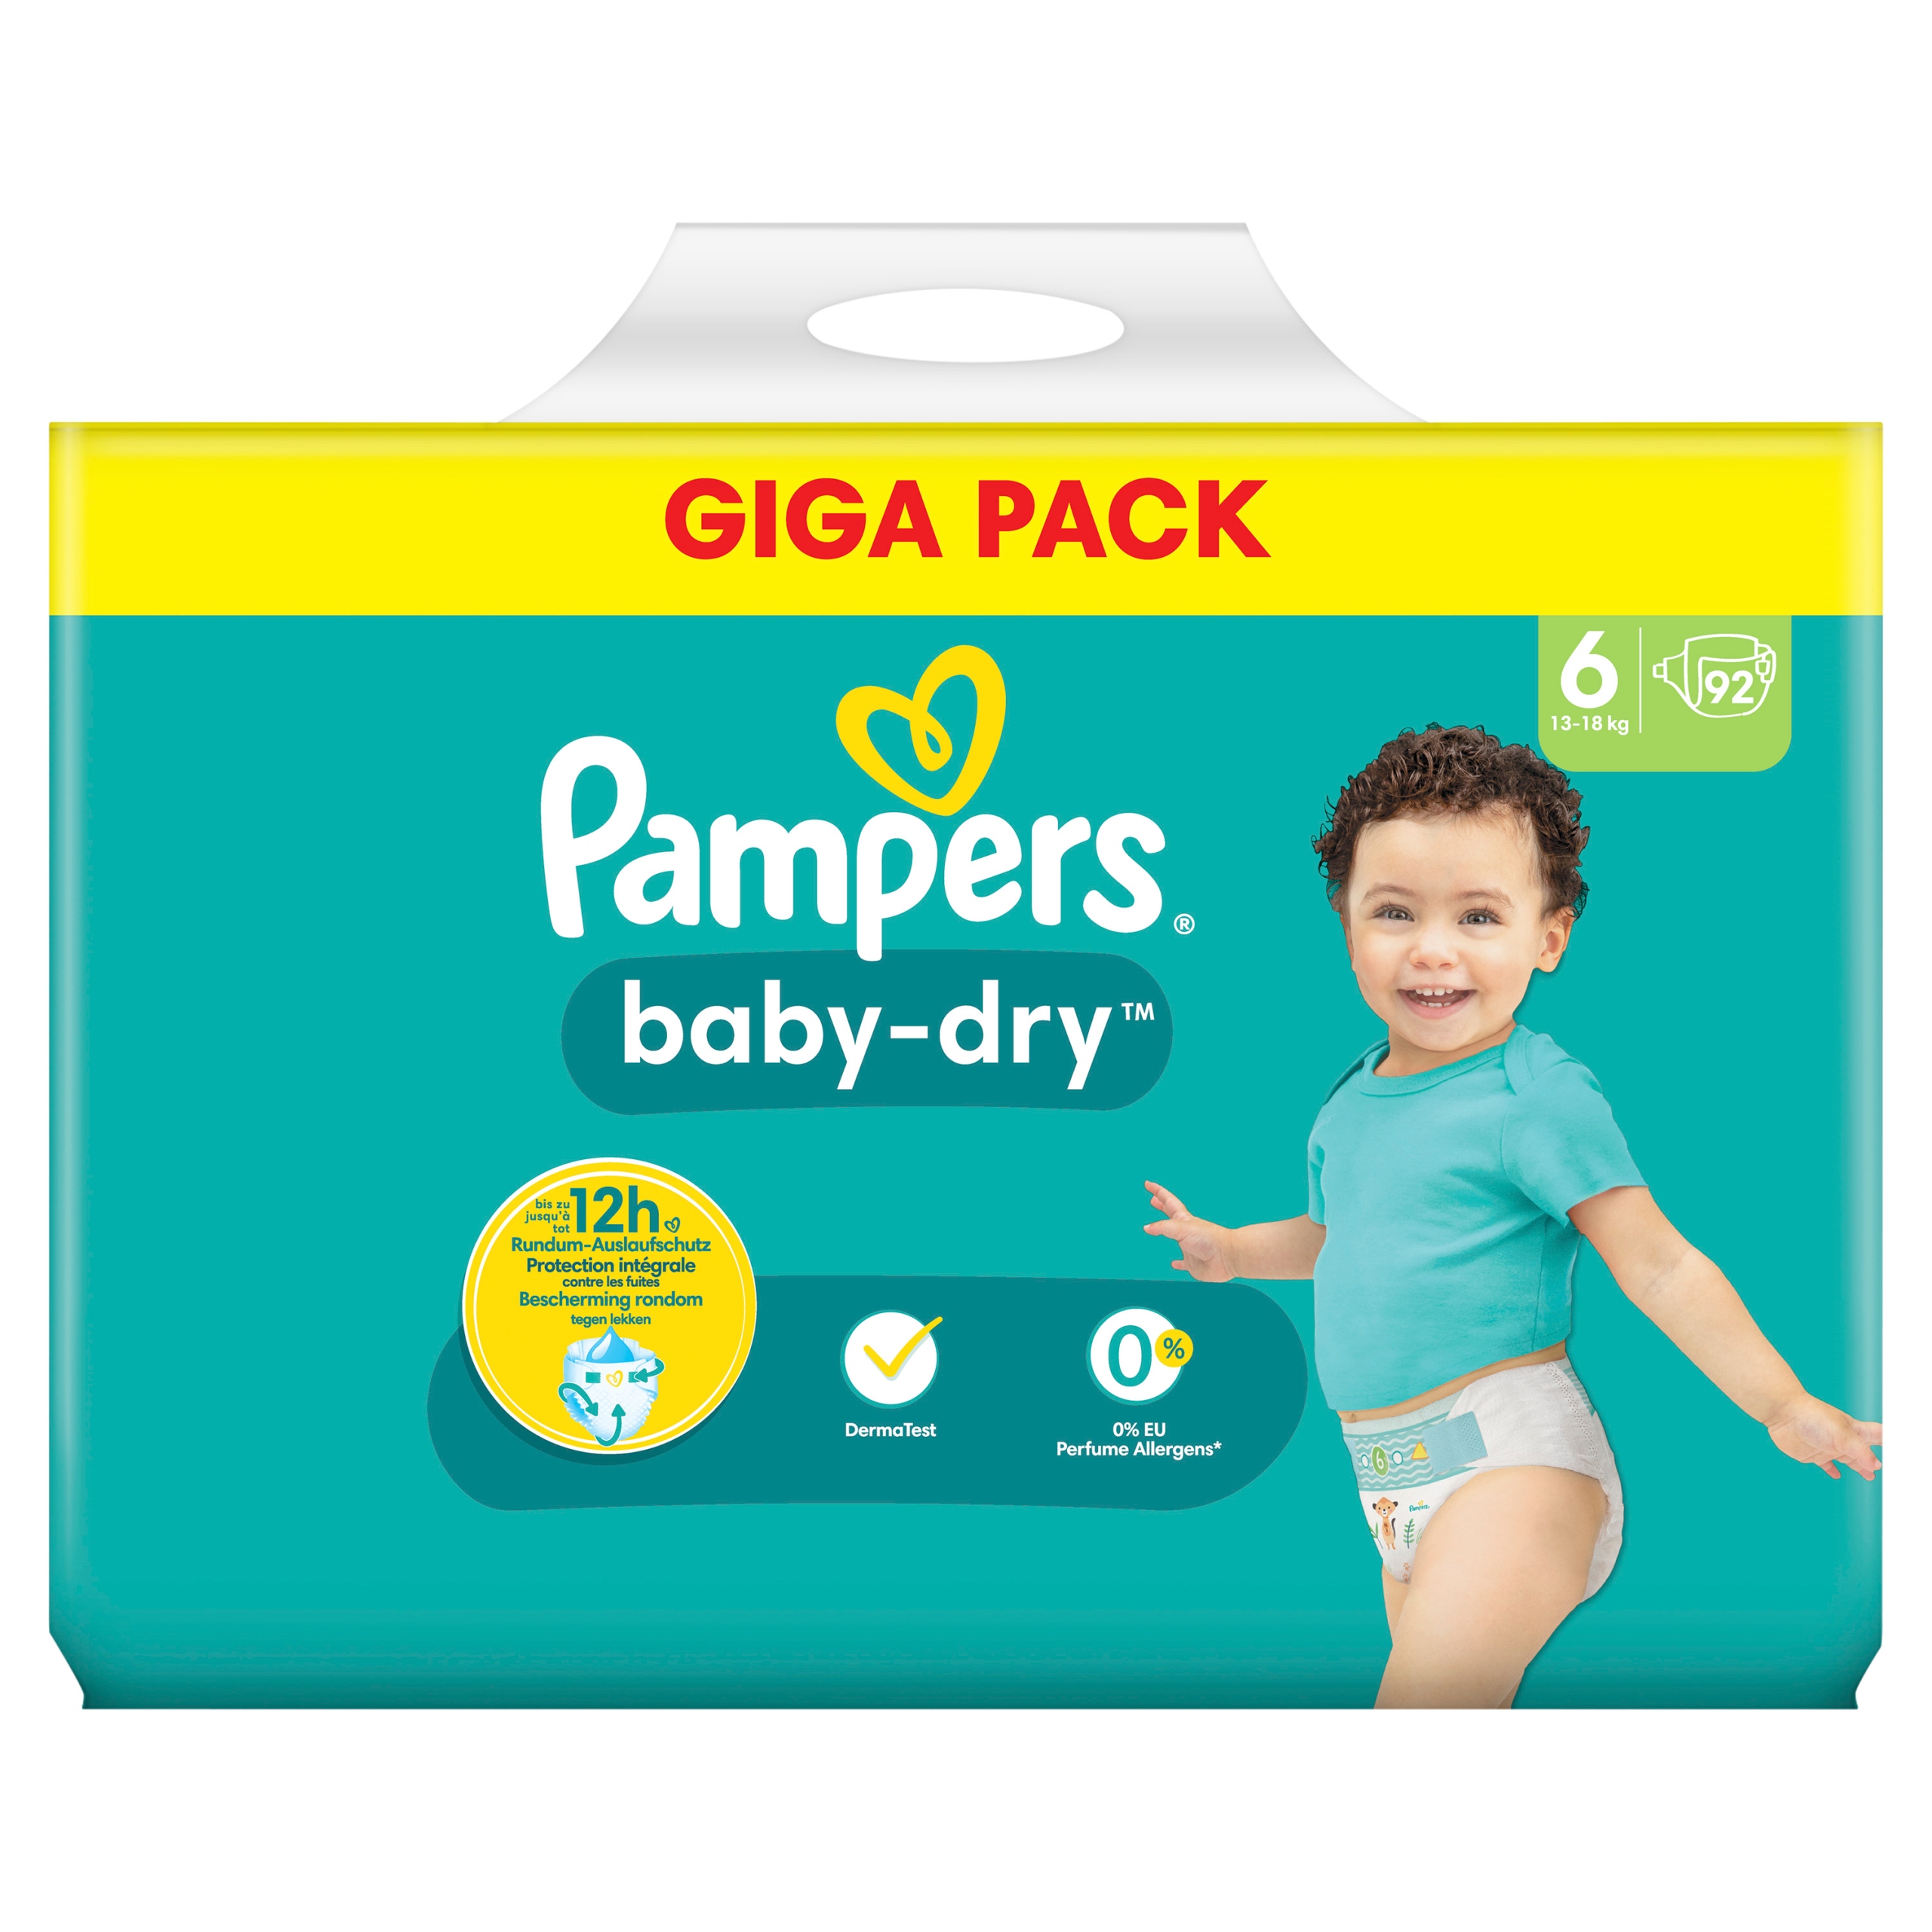 pampers active baby dry 6 cena